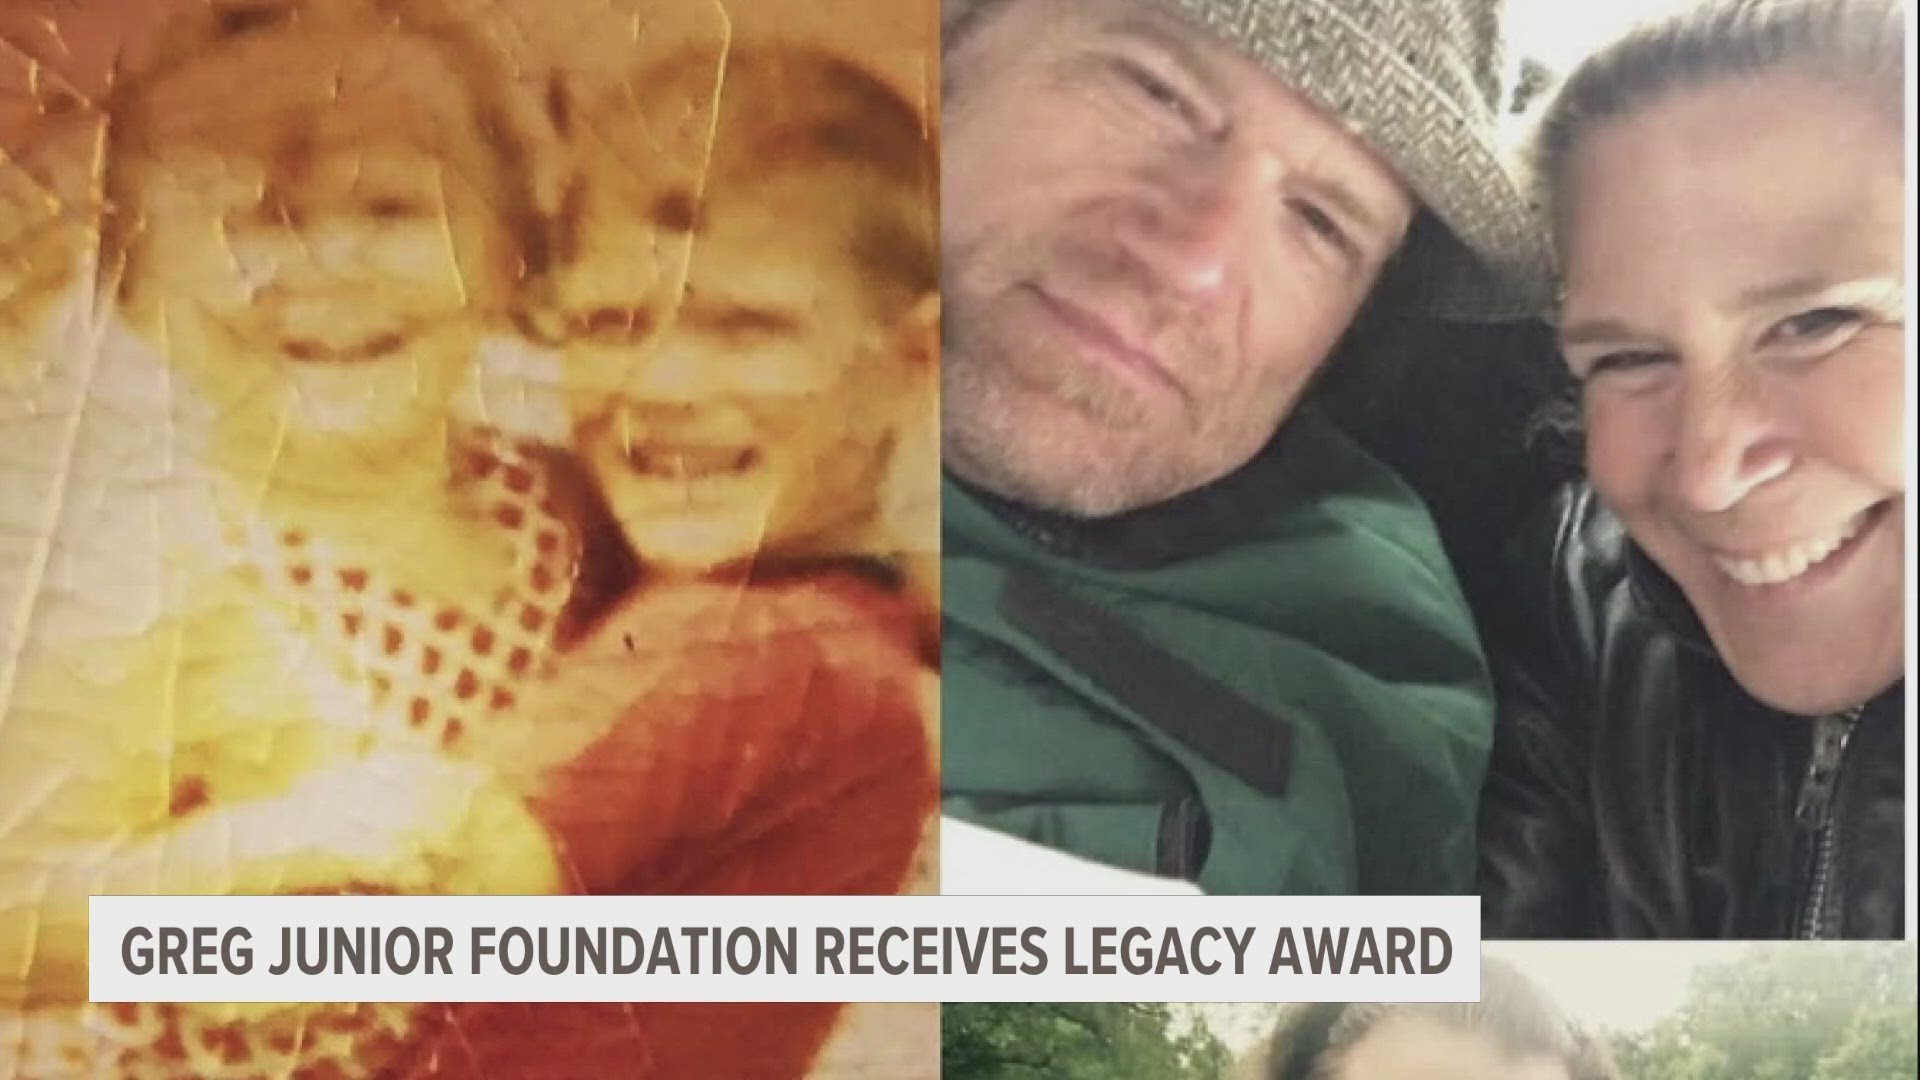 The family of Gregory Montgomery Jr., a former punter for Michigan State University, is continuing to honor his life and legacy.